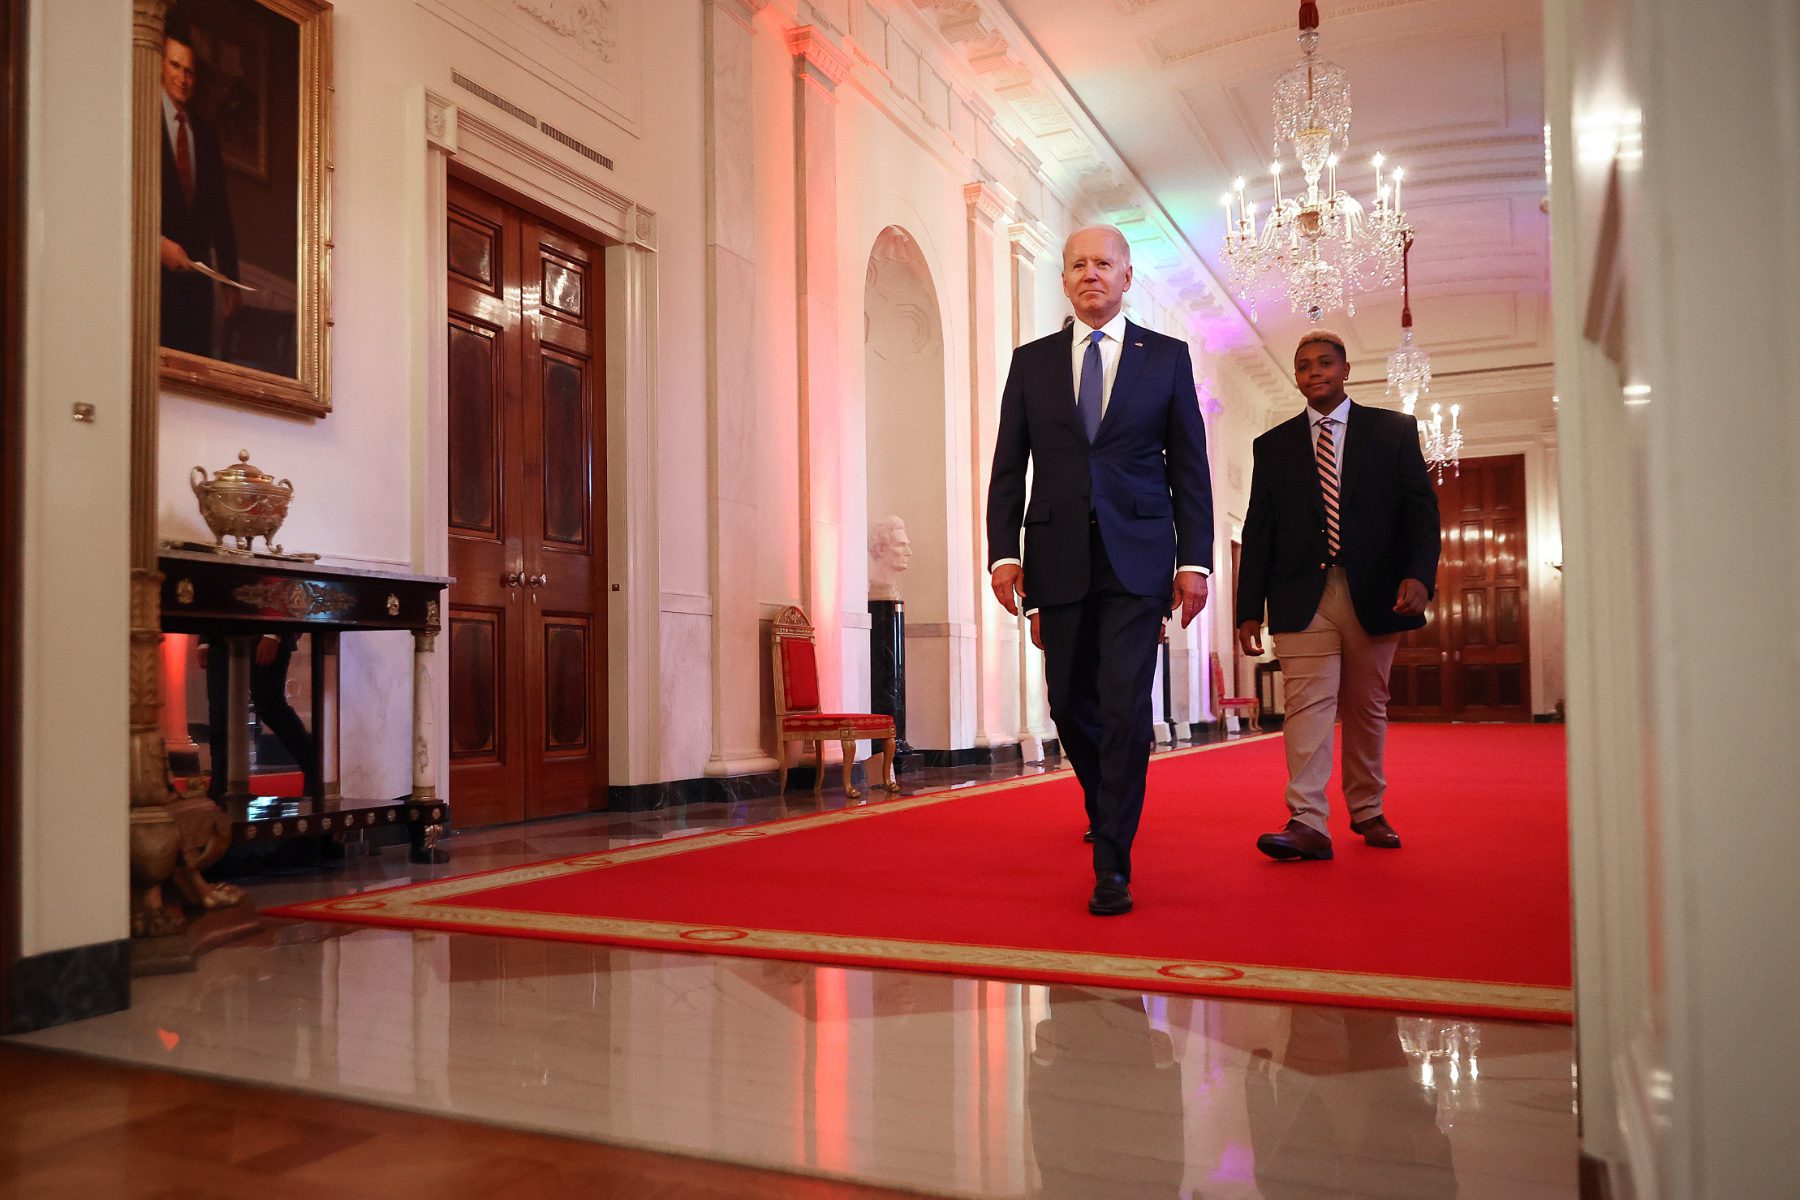 President Joe Biden and Human Rights Campaign youth ambassador Ashton Mota walk into the East Room for an event commemorating LGBTQ+ Pride Month at the White House on June 25, 2021.